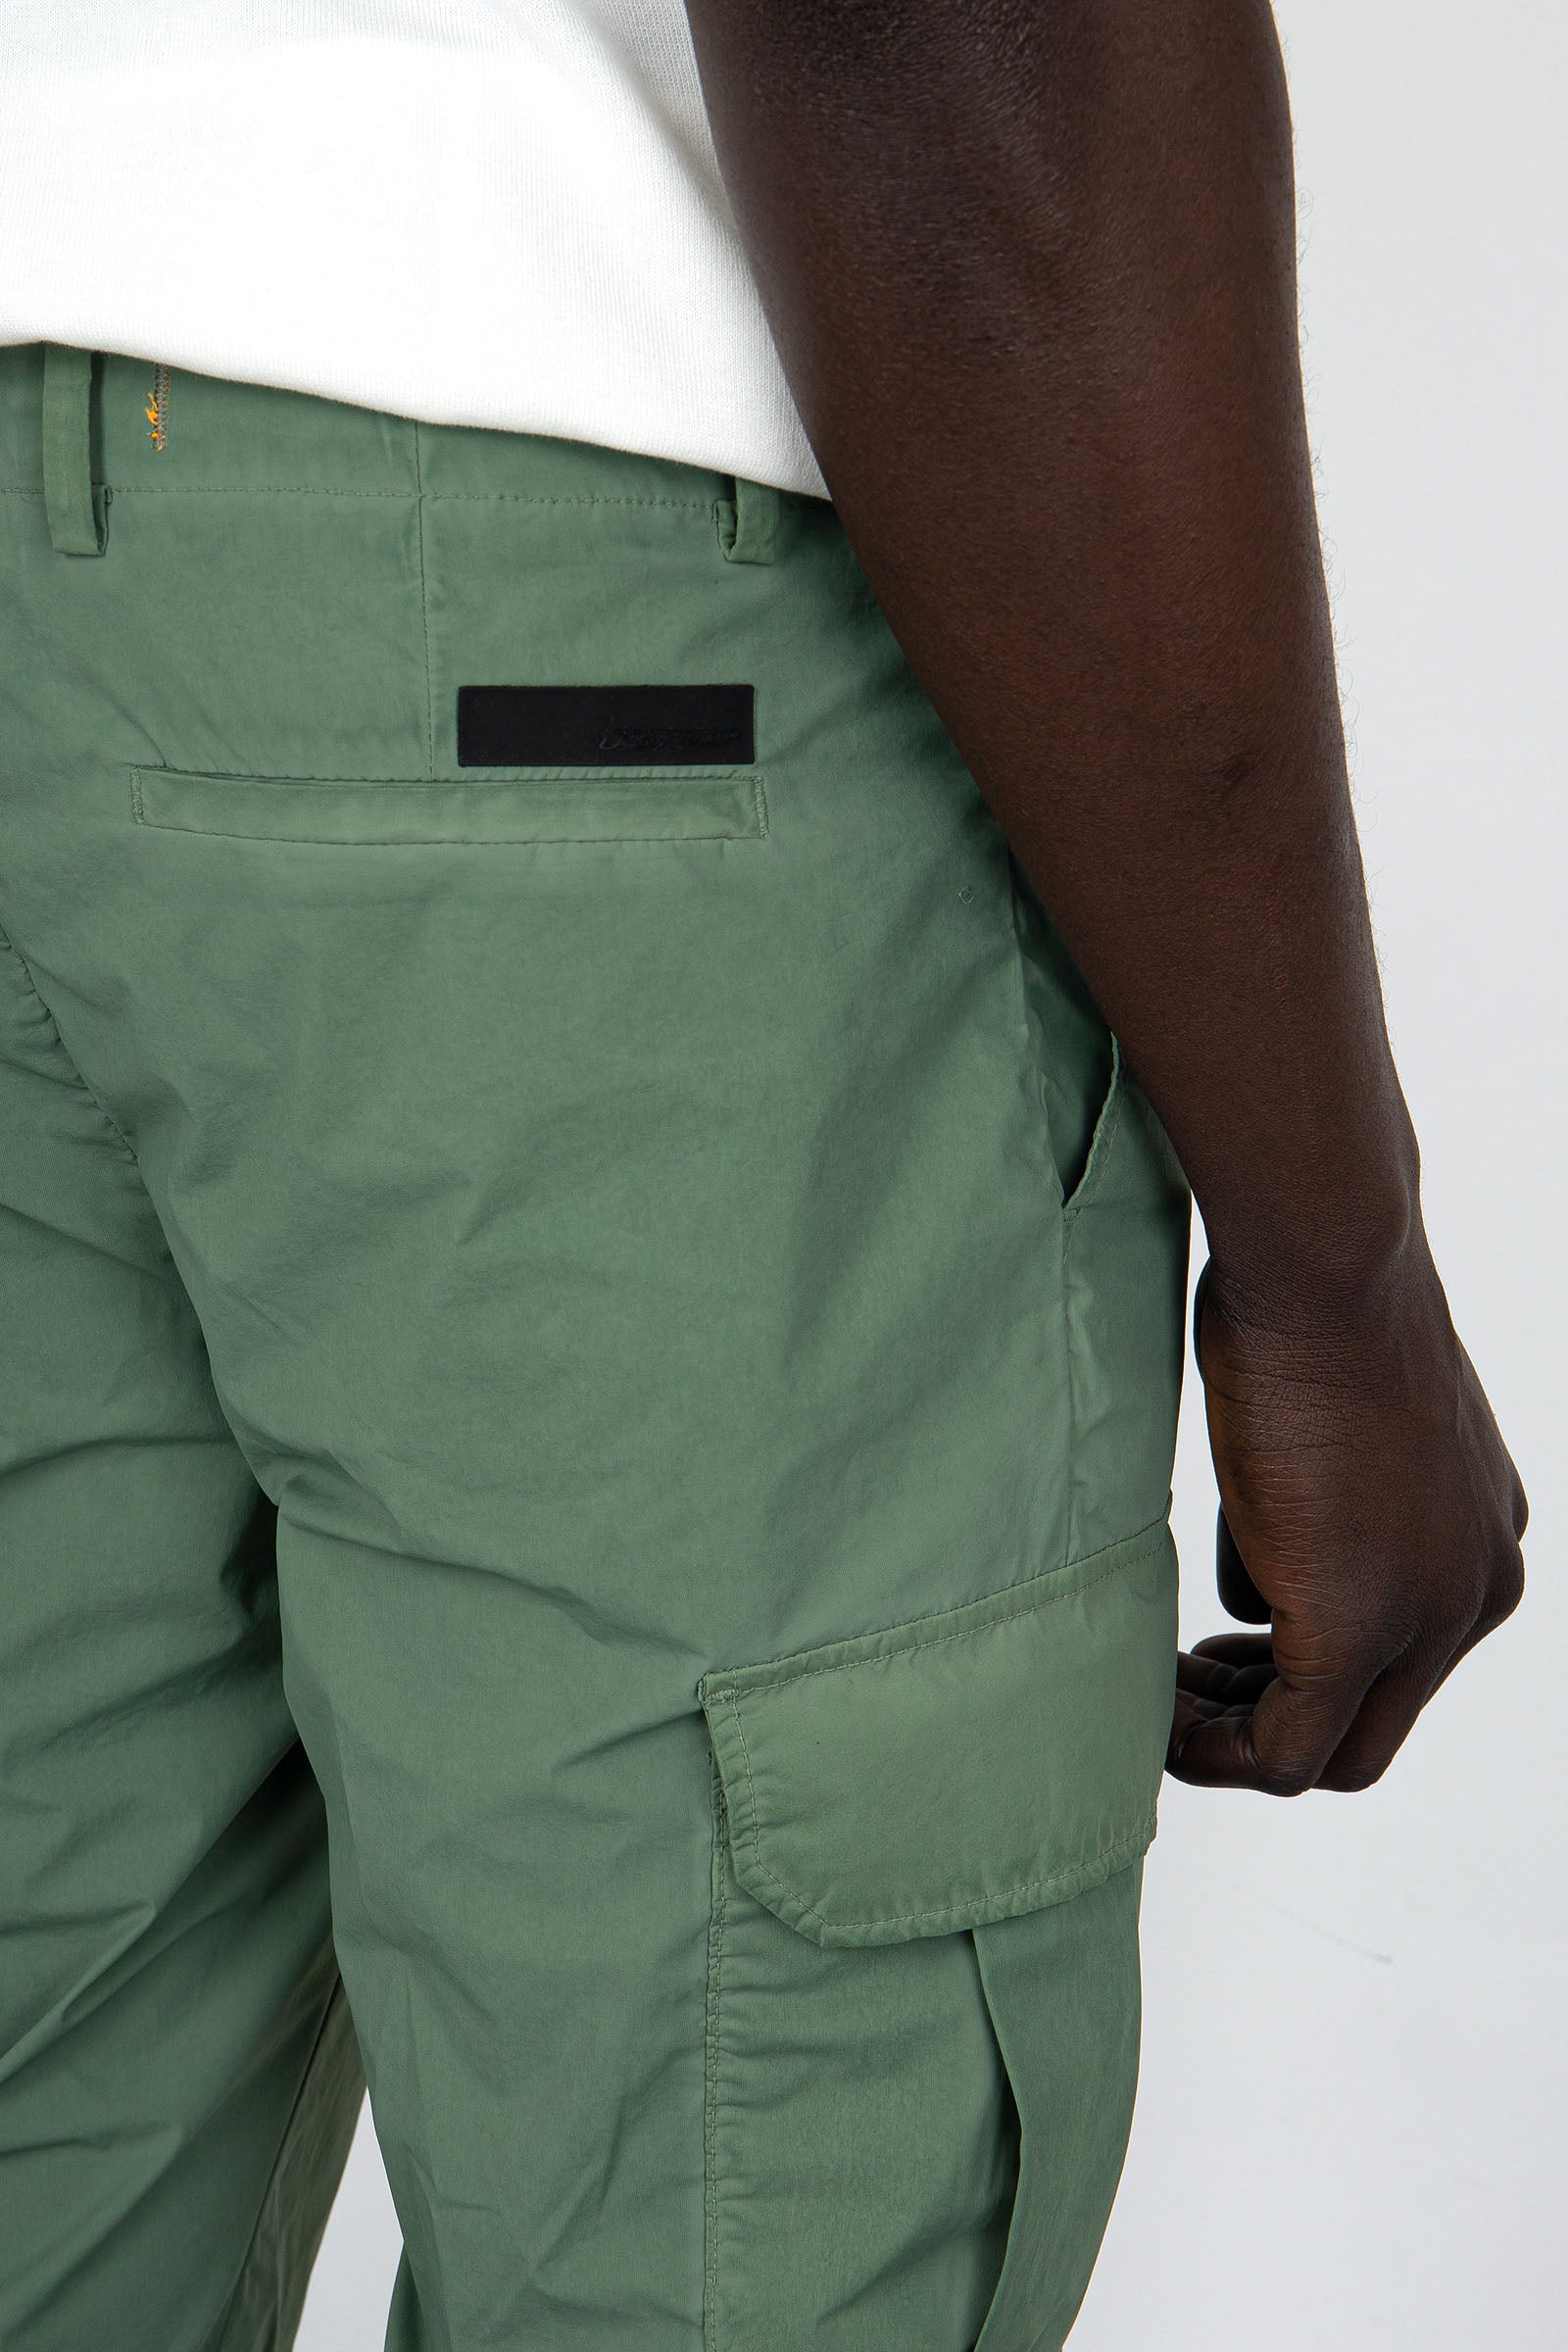 RRD Extralight GDY Cargo Pants Synthetic Green - 5